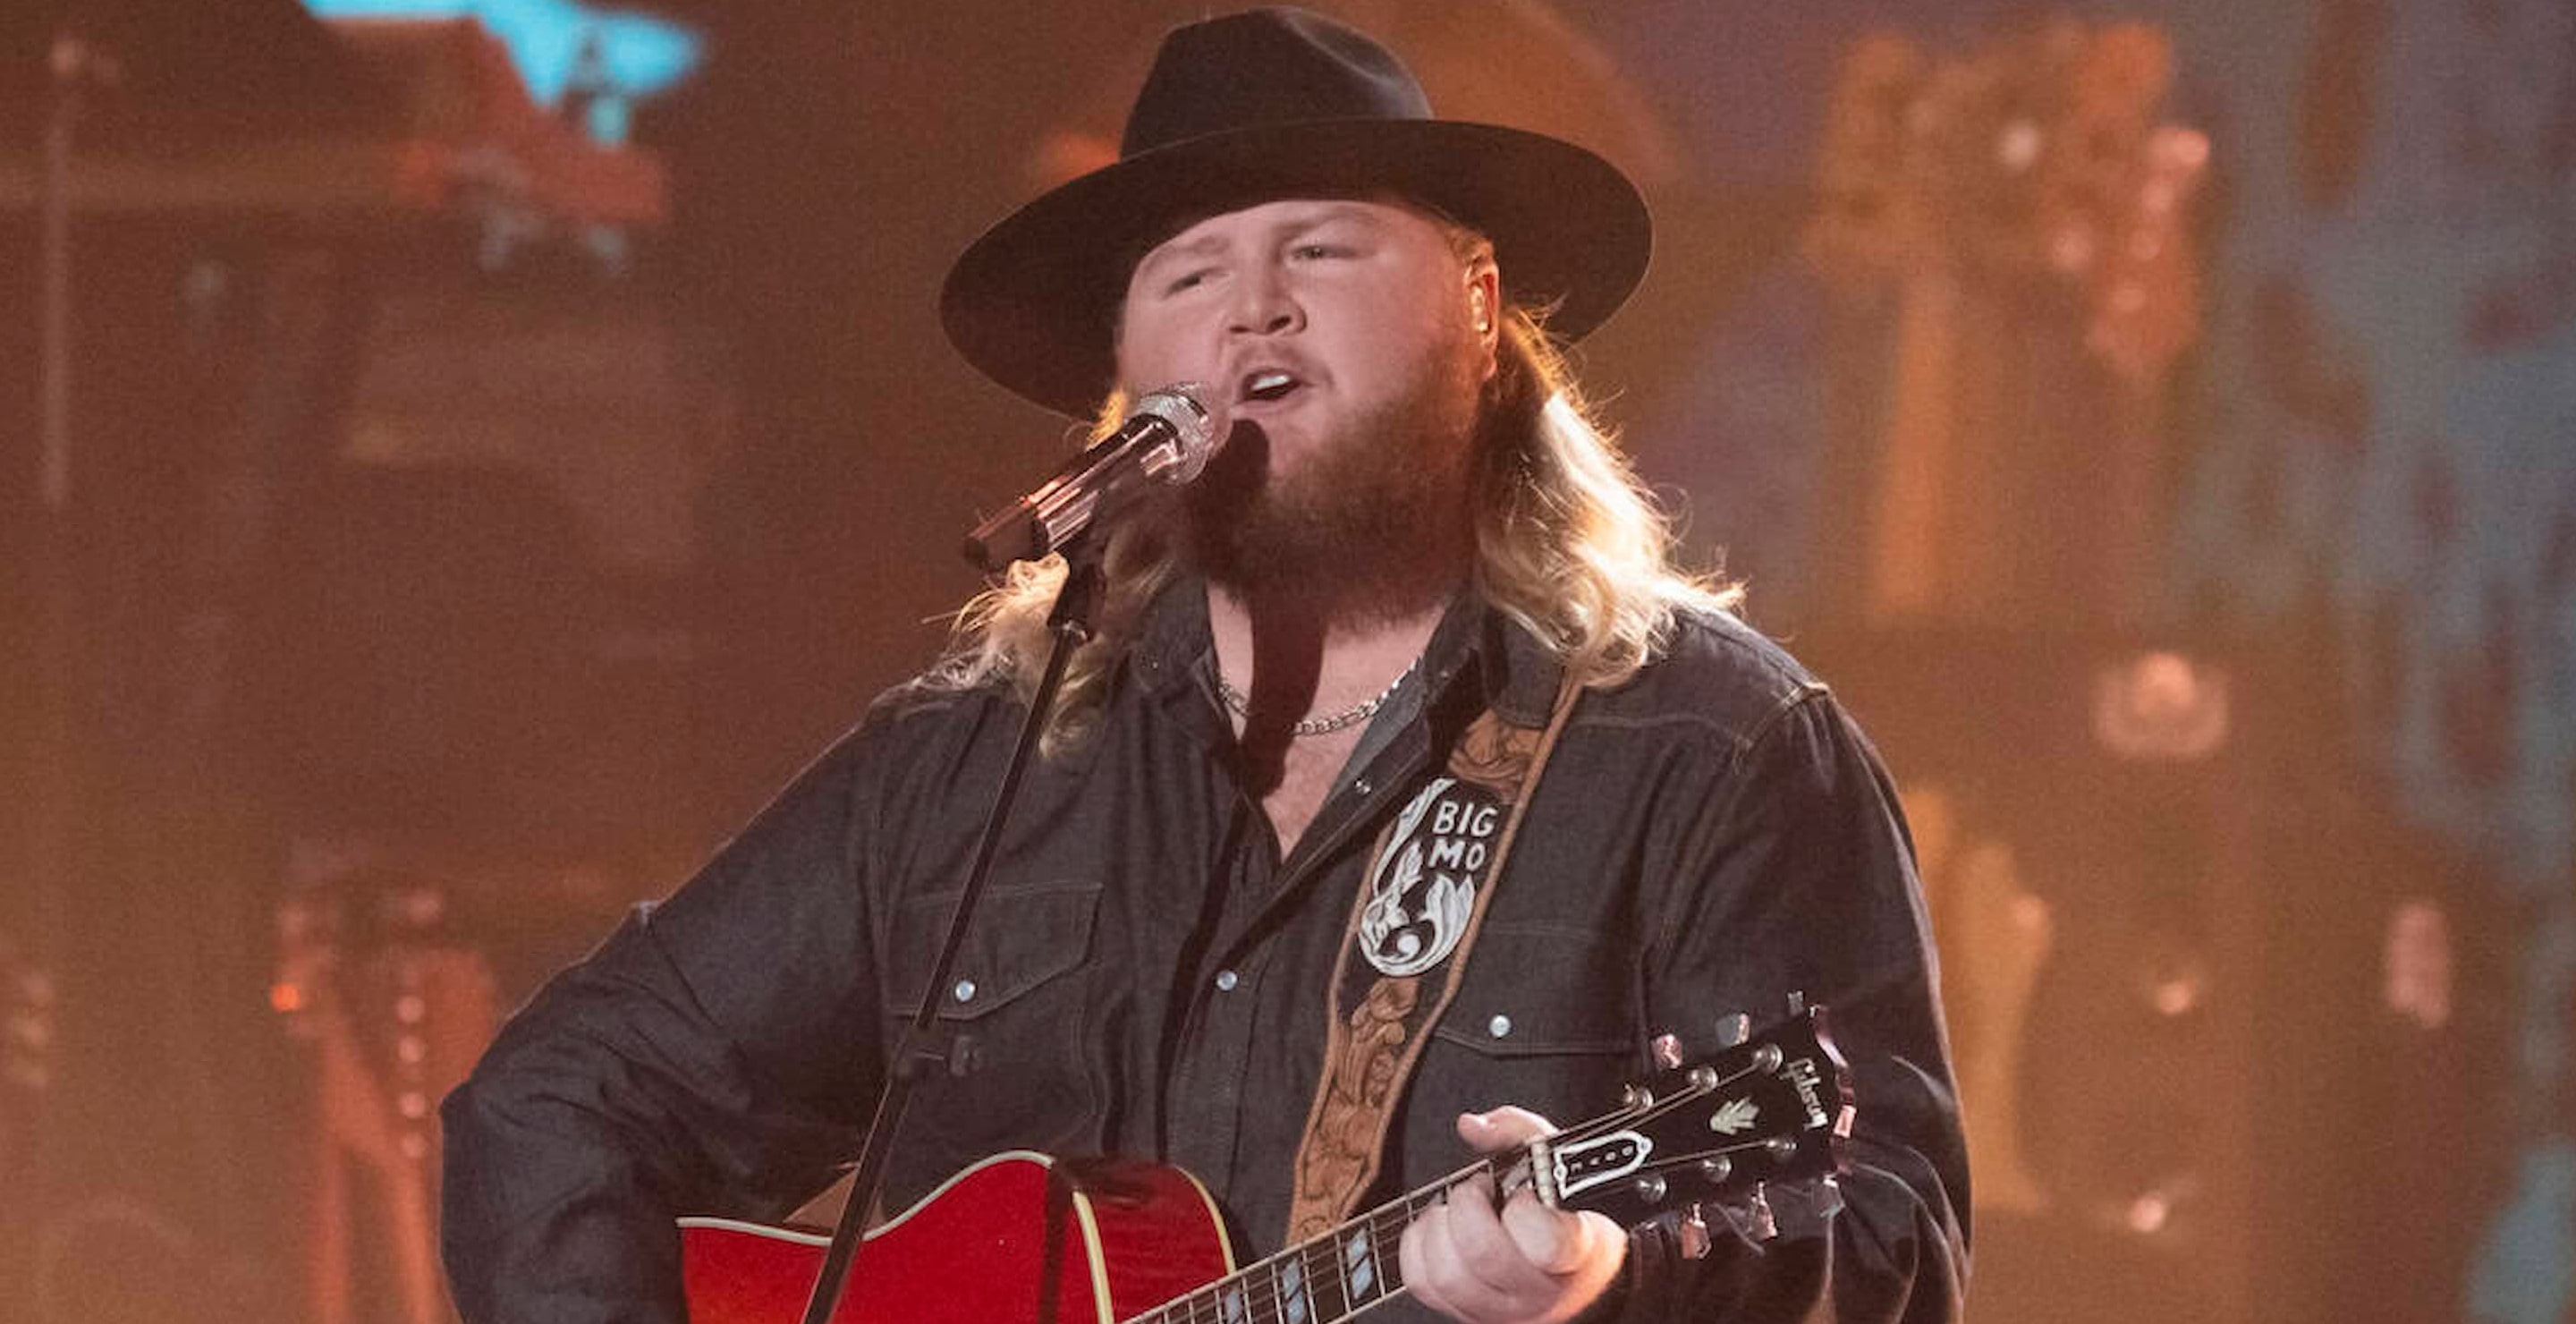 American Idol Runner Up Will Moseley Going On Tour With Huge Country Band